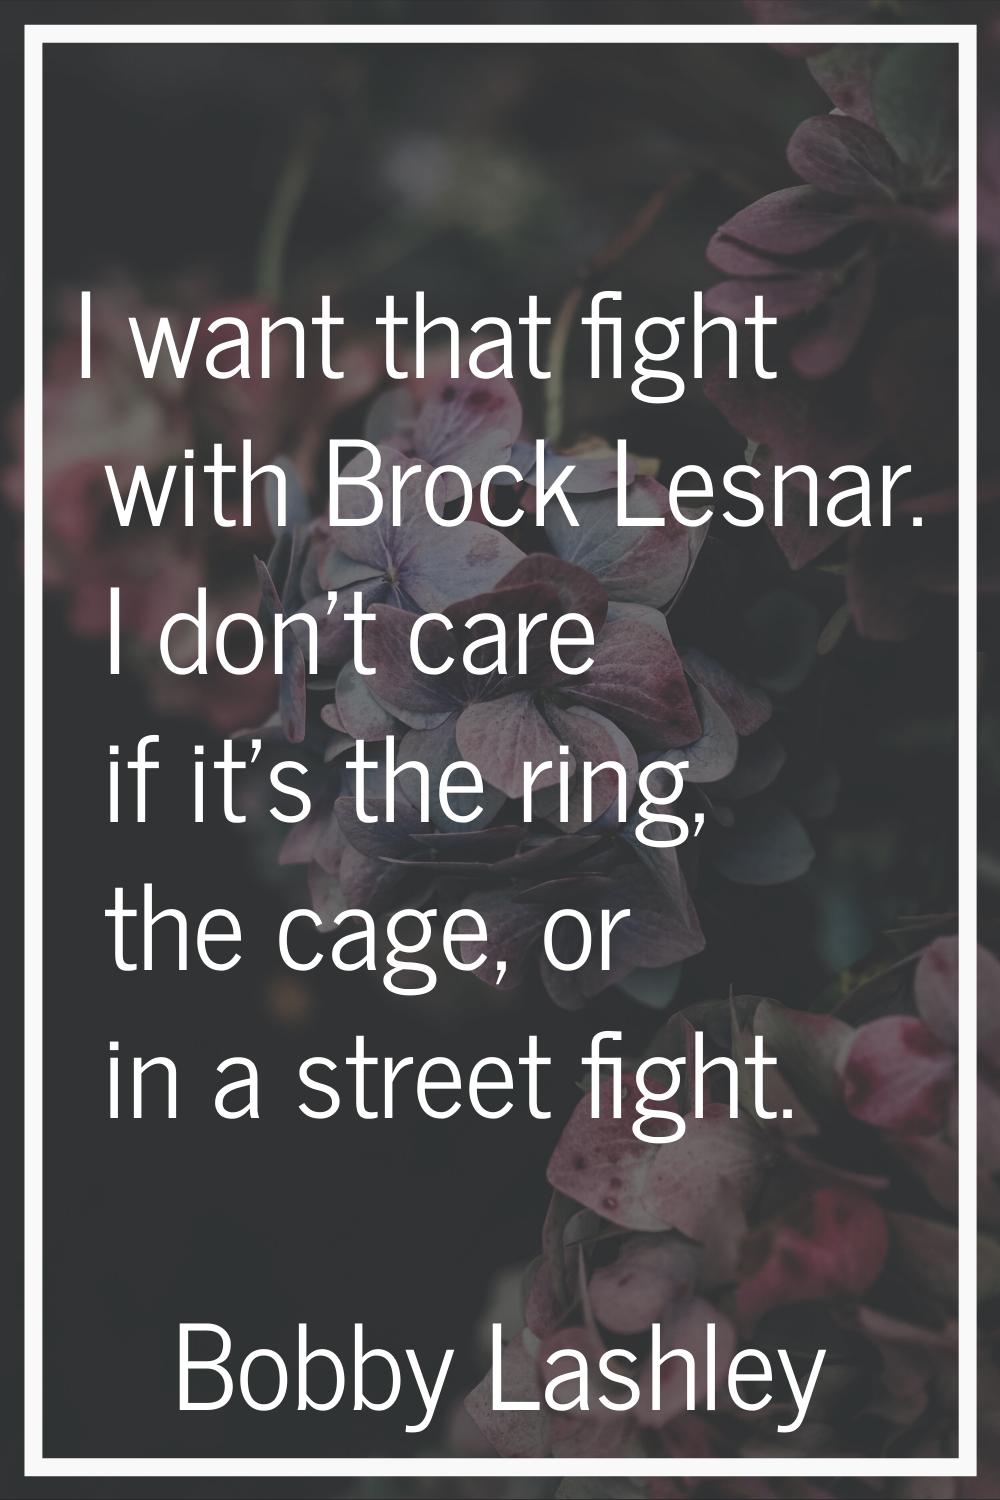 I want that fight with Brock Lesnar. I don't care if it's the ring, the cage, or in a street fight.